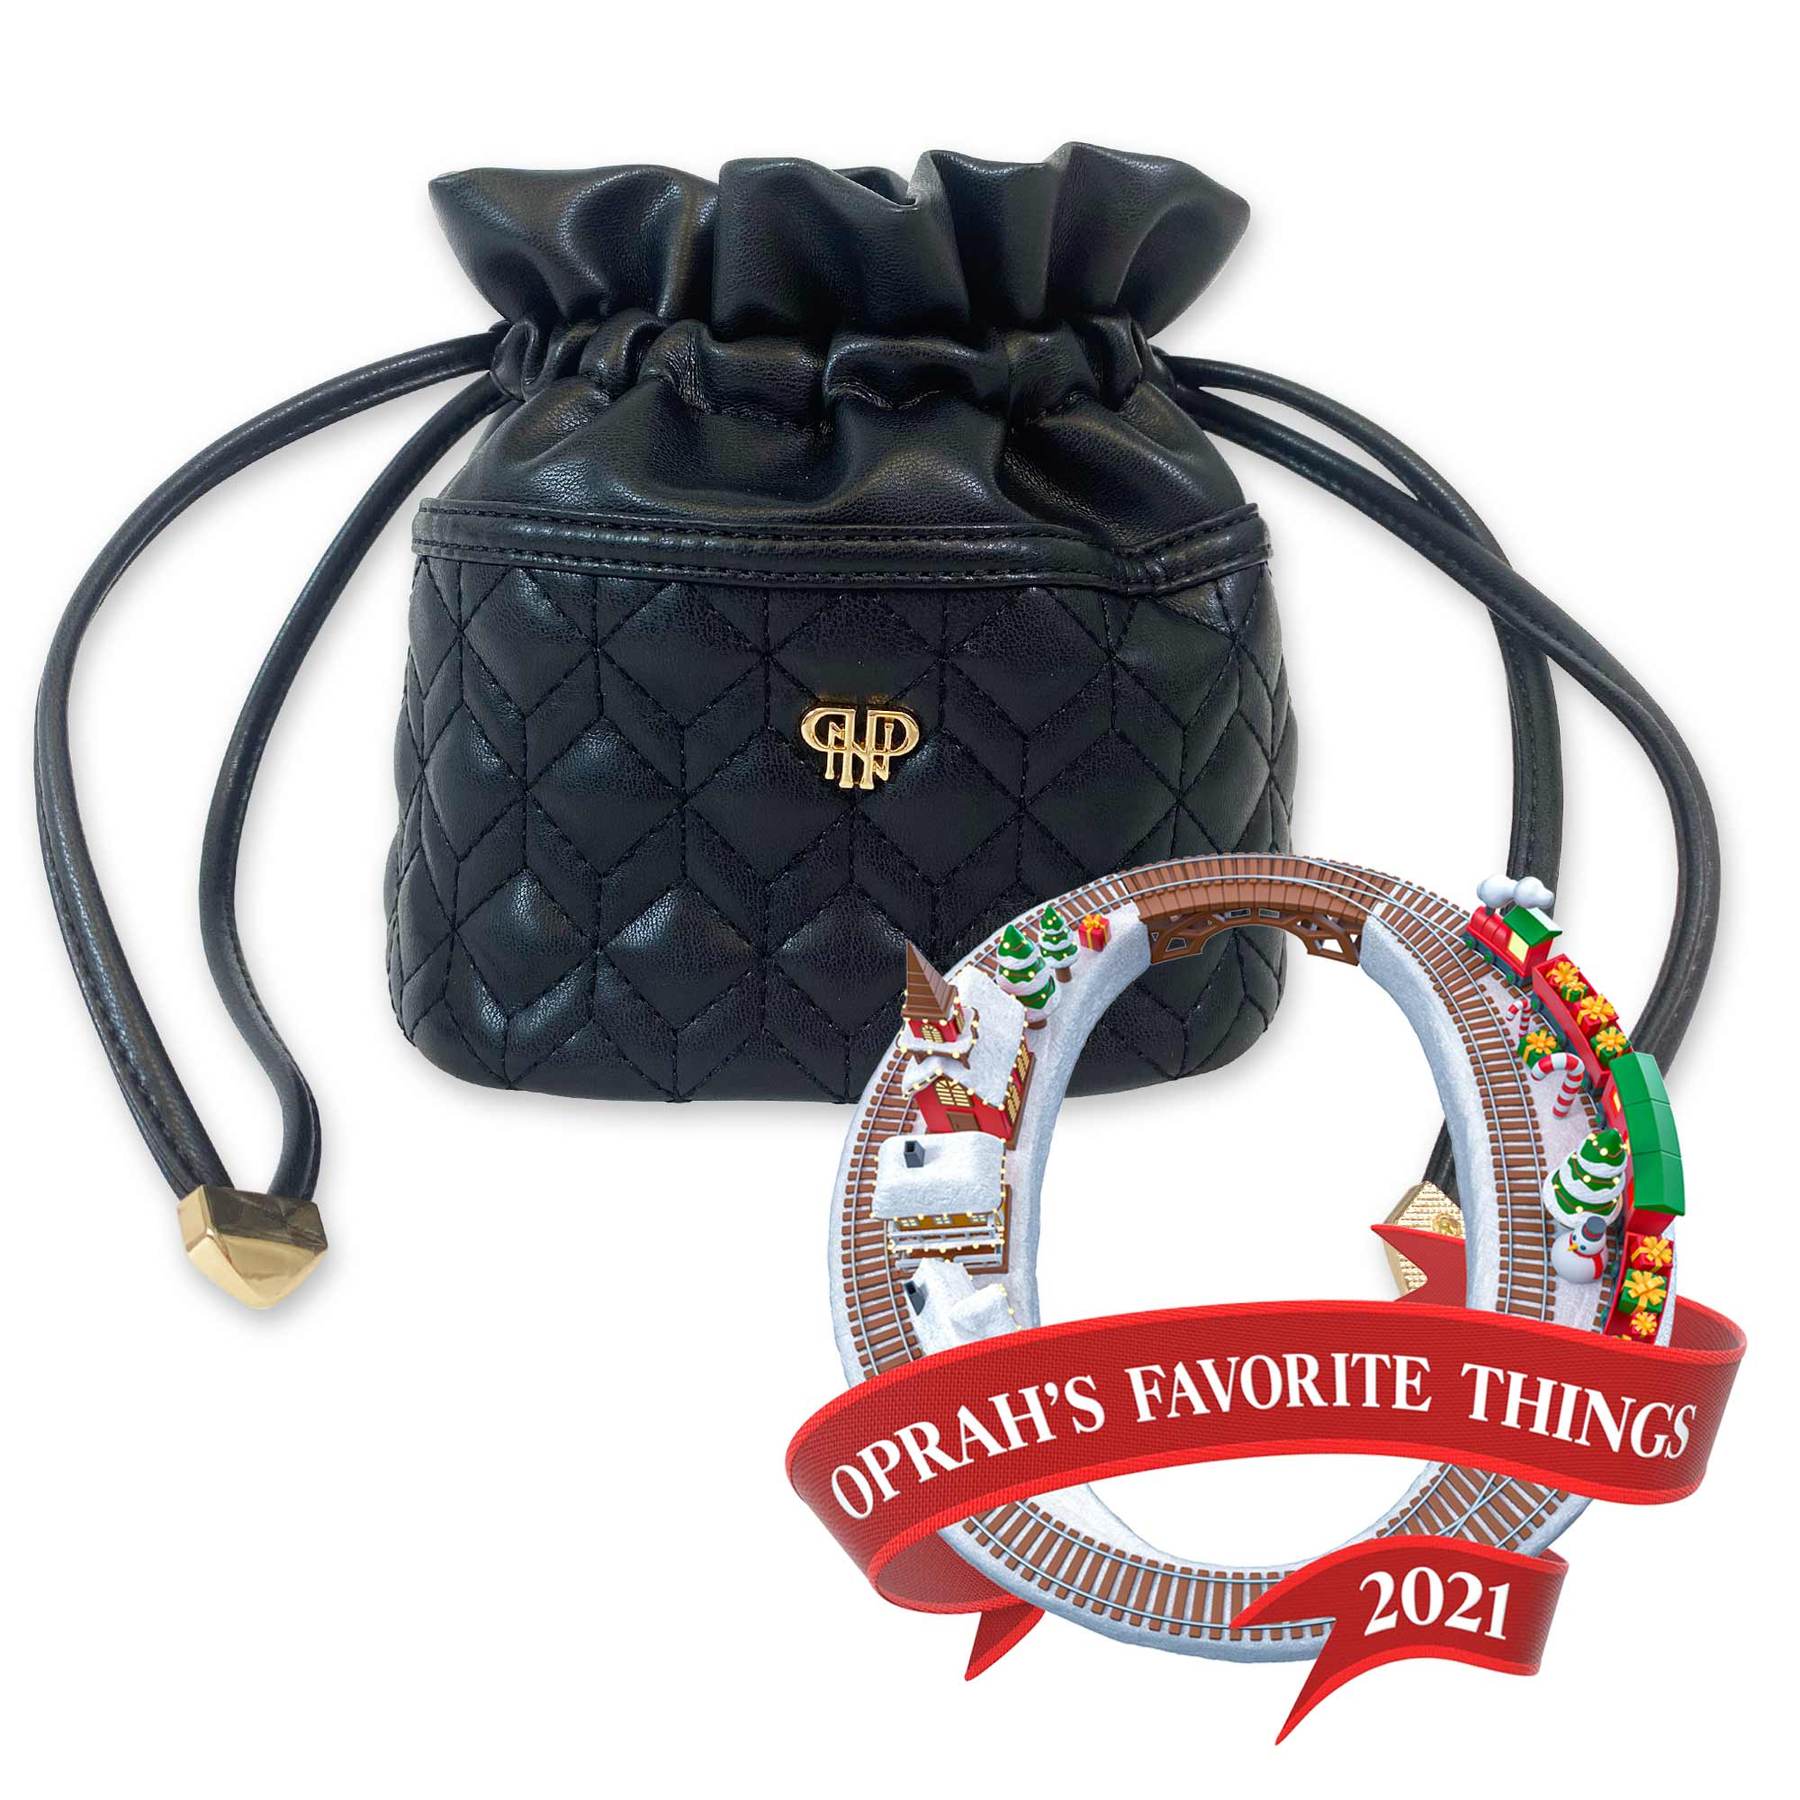 OPRAH'S FAVORITE THINGS 2021 - PurseN Ultra Jewelry Case - Midnight Quilted  - Irv's Luggage